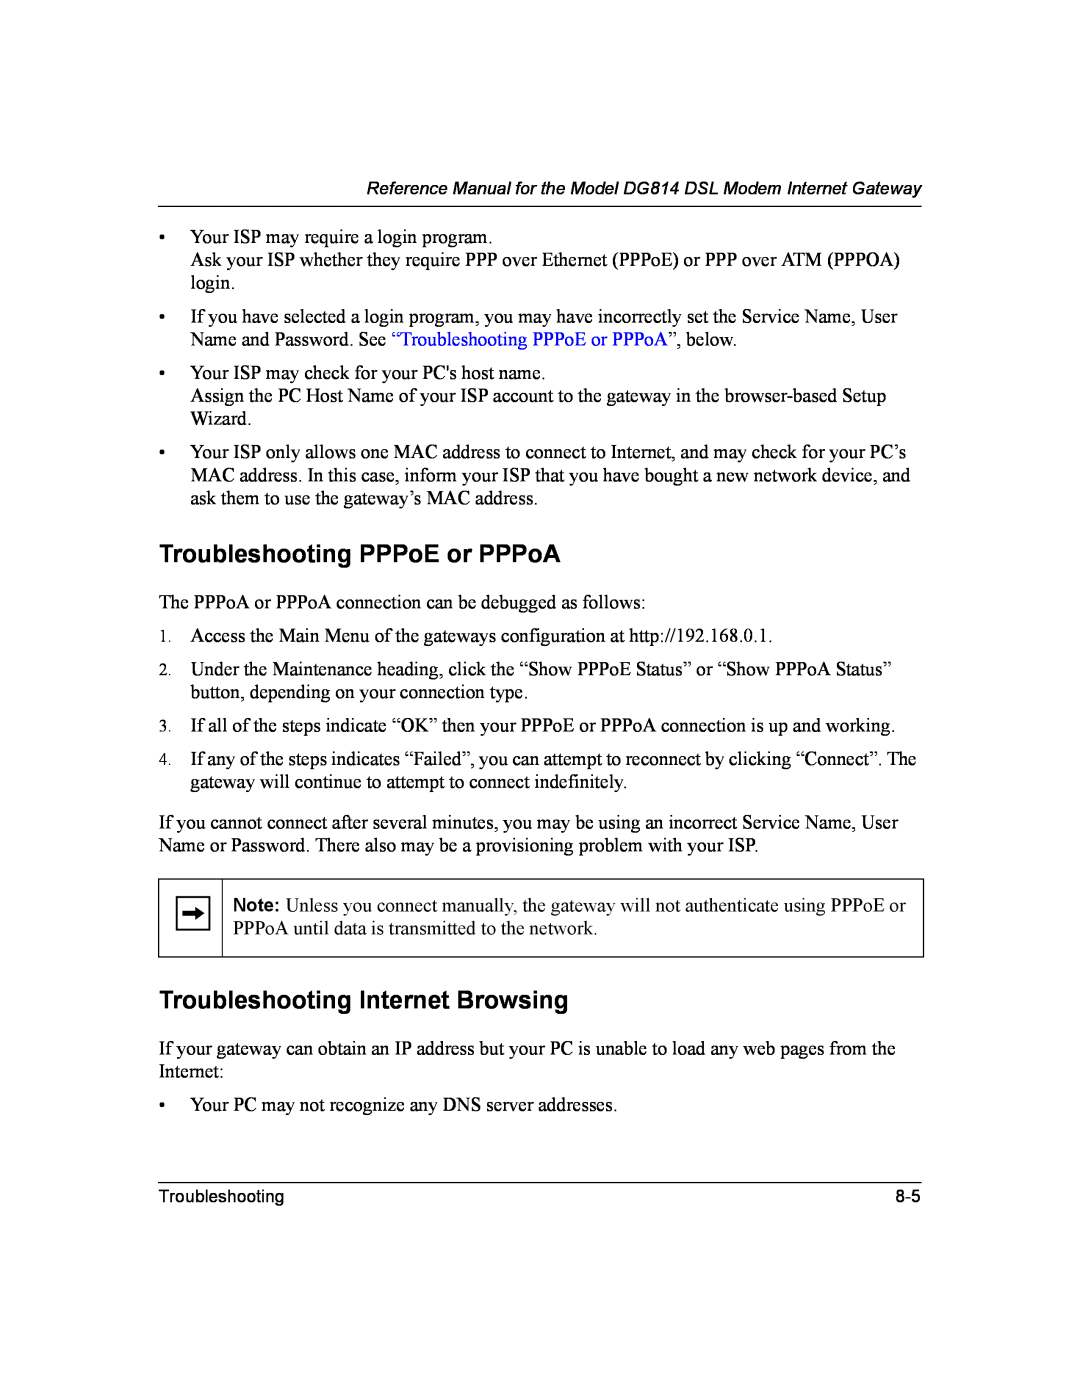 NETGEAR DG814 DSL manual Troubleshooting PPPoE or PPPoA, Troubleshooting Internet Browsing 